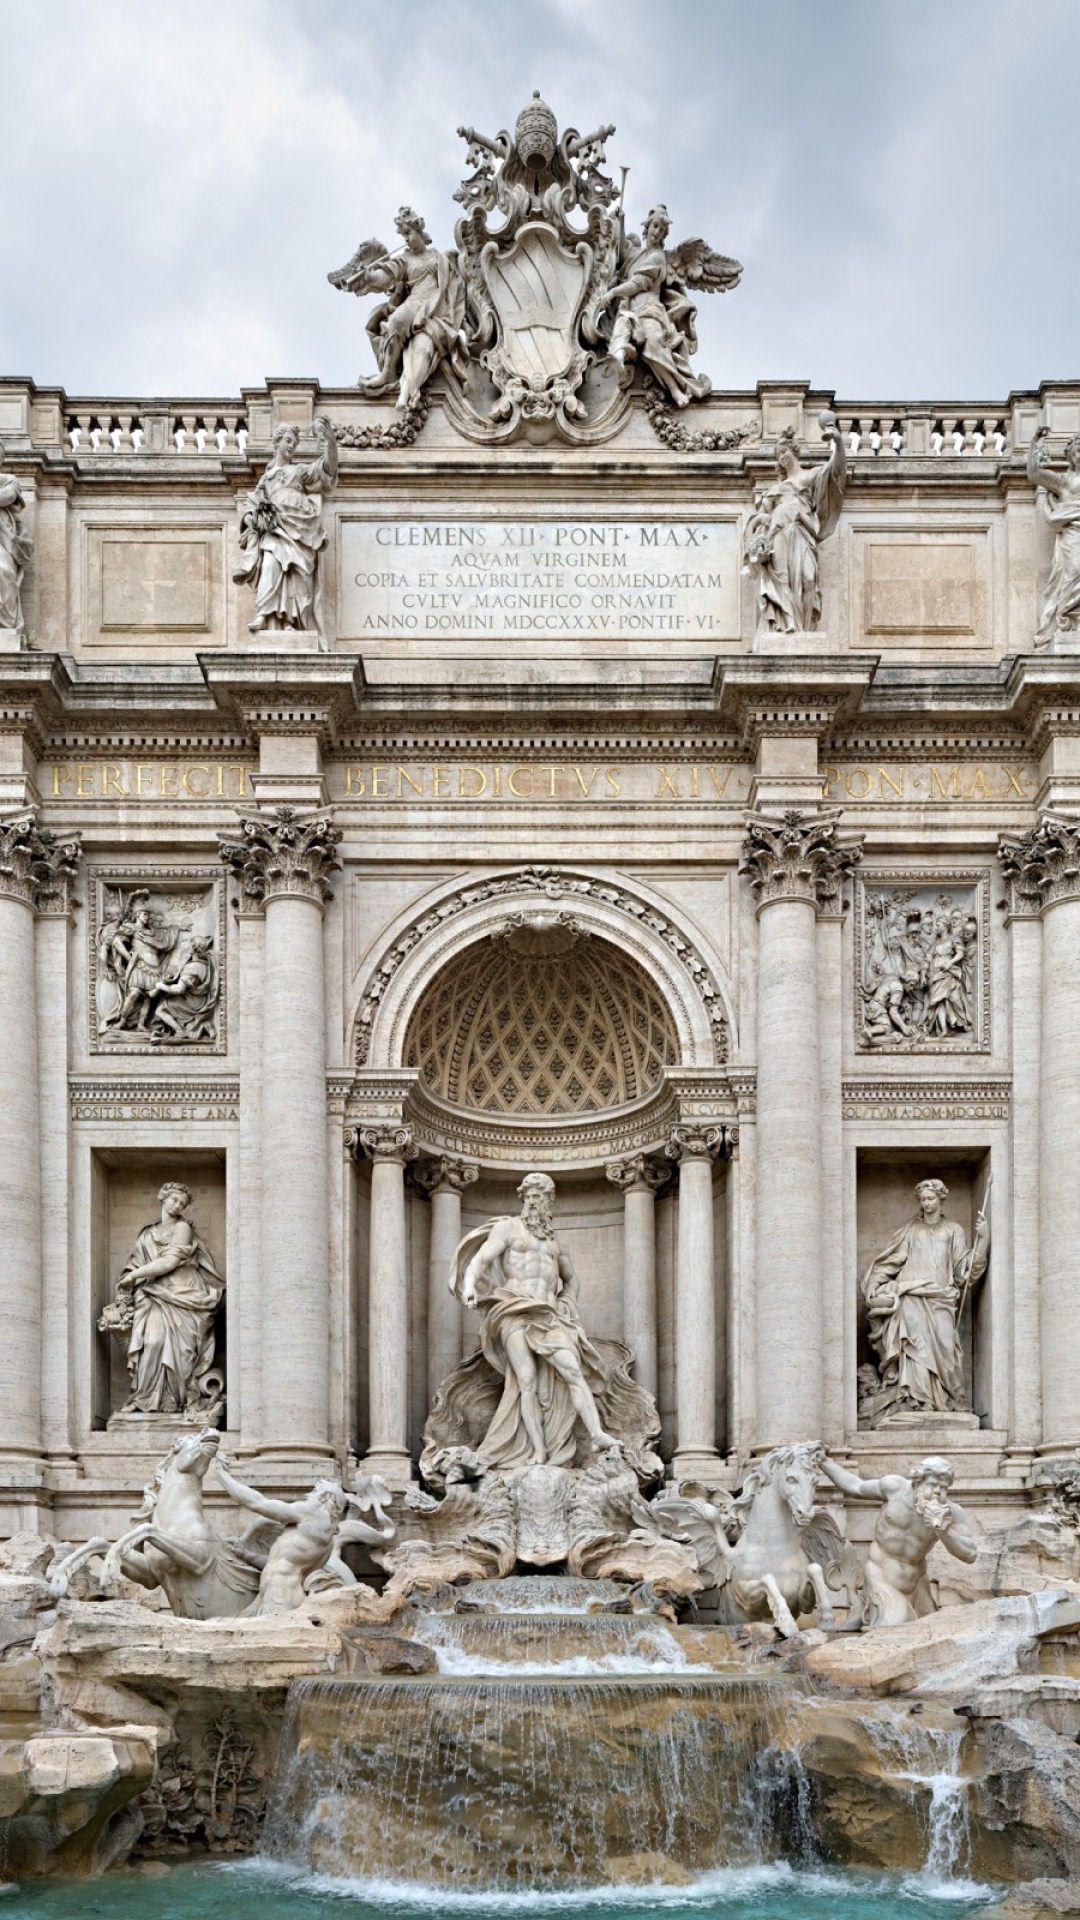 Download Wallpaper 1080x1920 Trevi fountain, Rome, Italy, May Sony